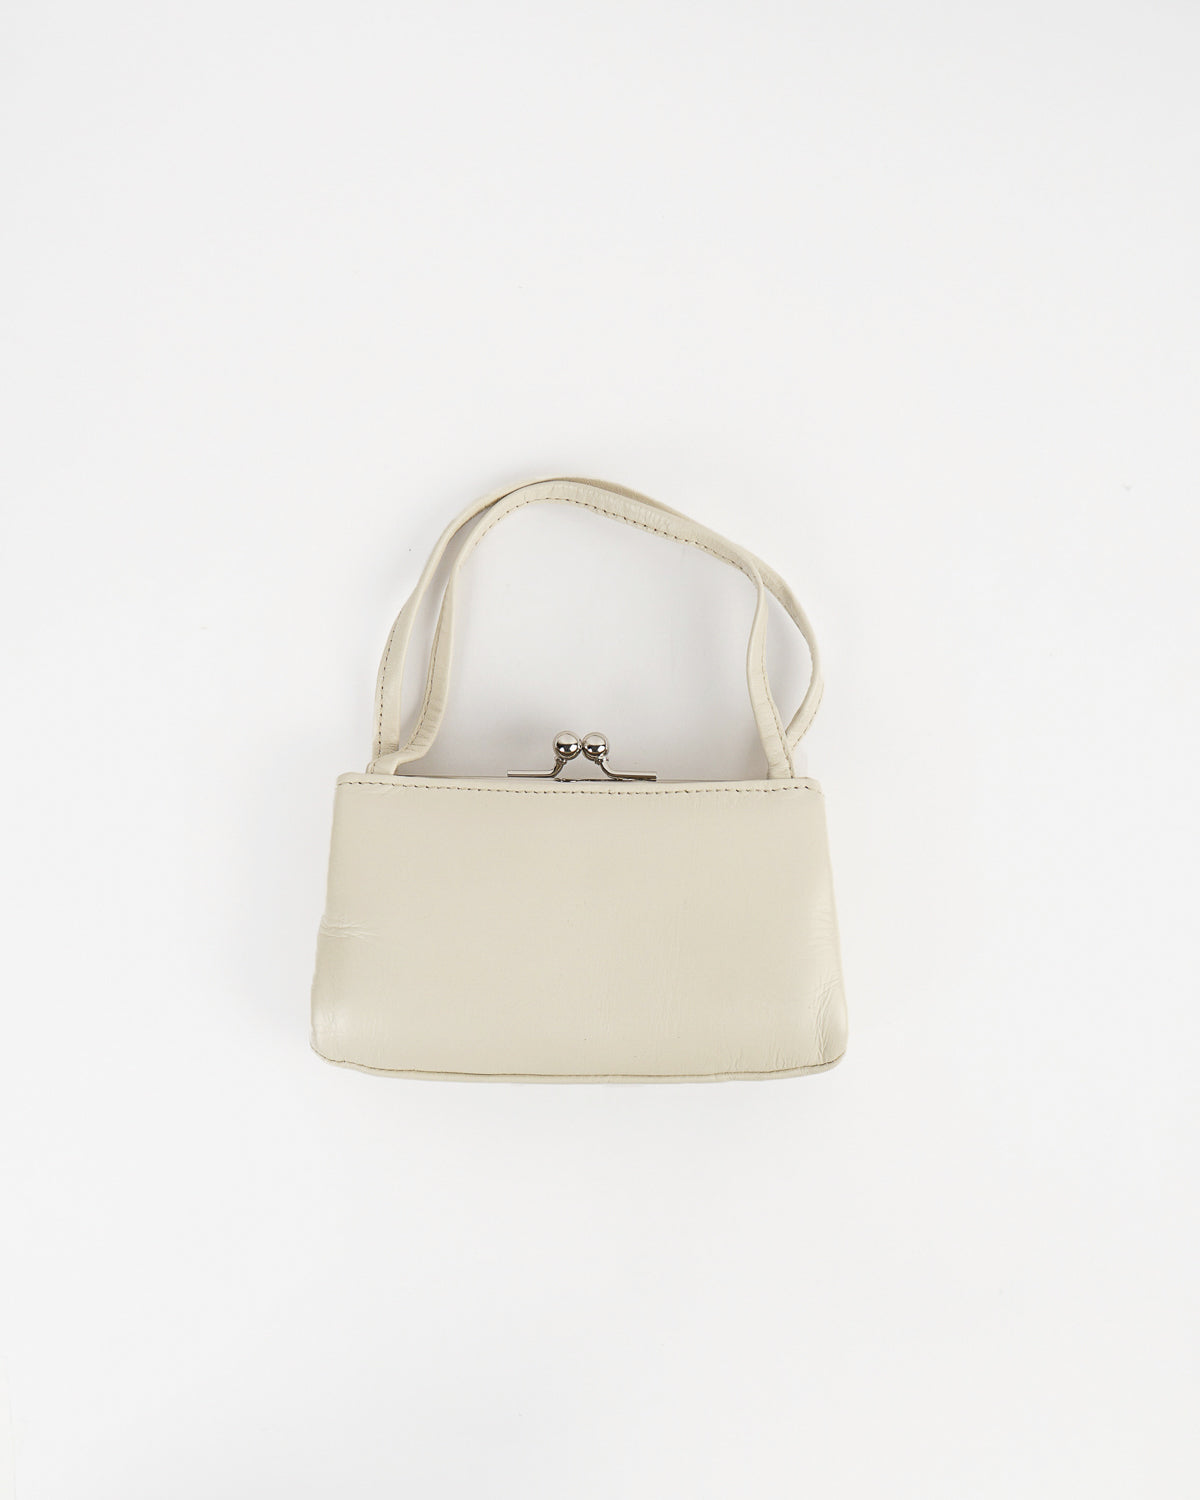 White Leather Purse With Handle